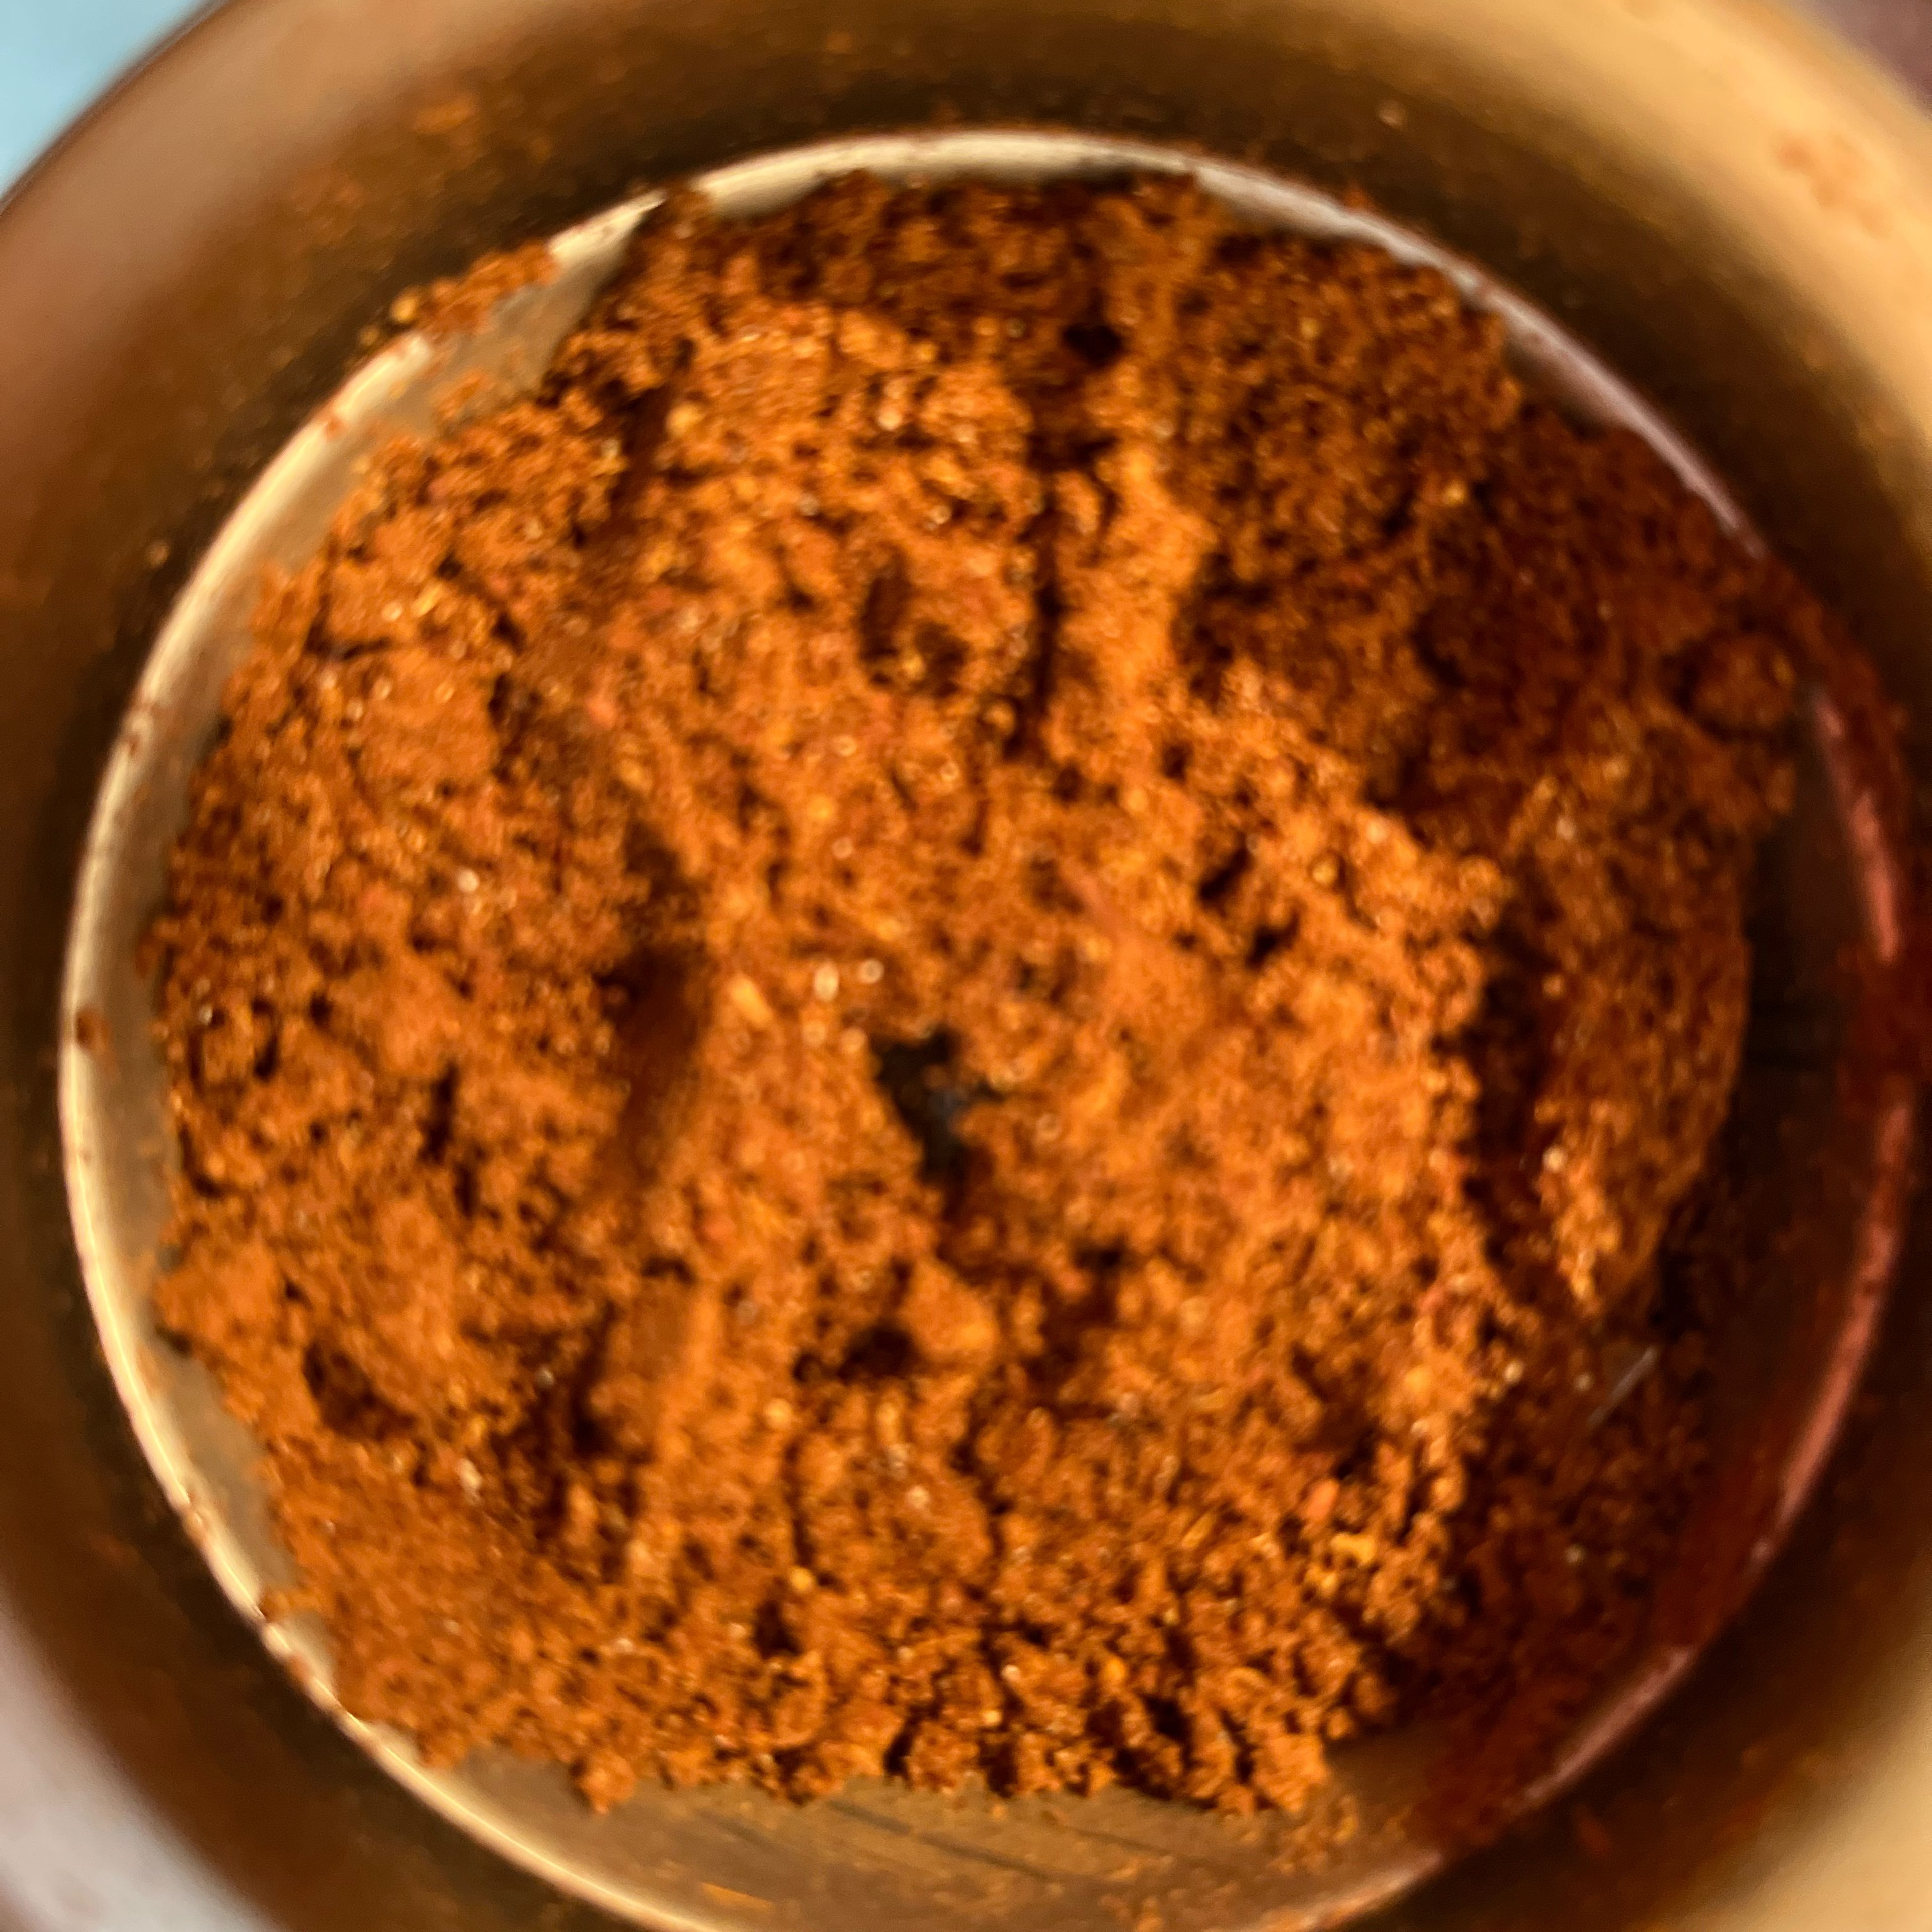 If the consistency of the powder is too coarse, grind it again or sieve it. The best is to use it right away for cooking, or store it in an airtight container.